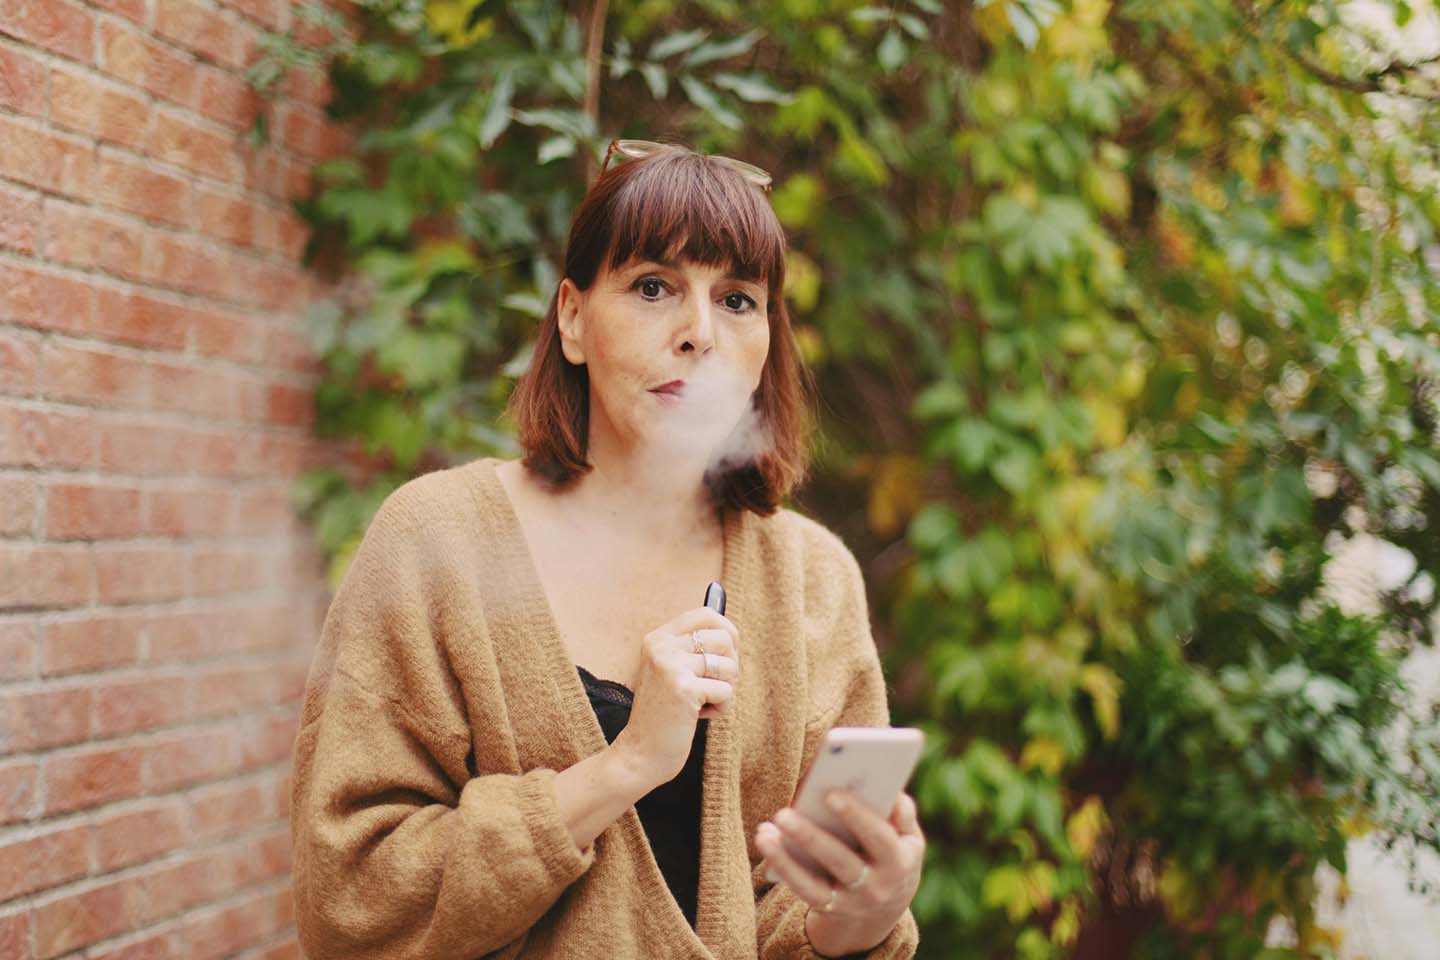 A woman in brown sweater holding a mobile phone while vaping